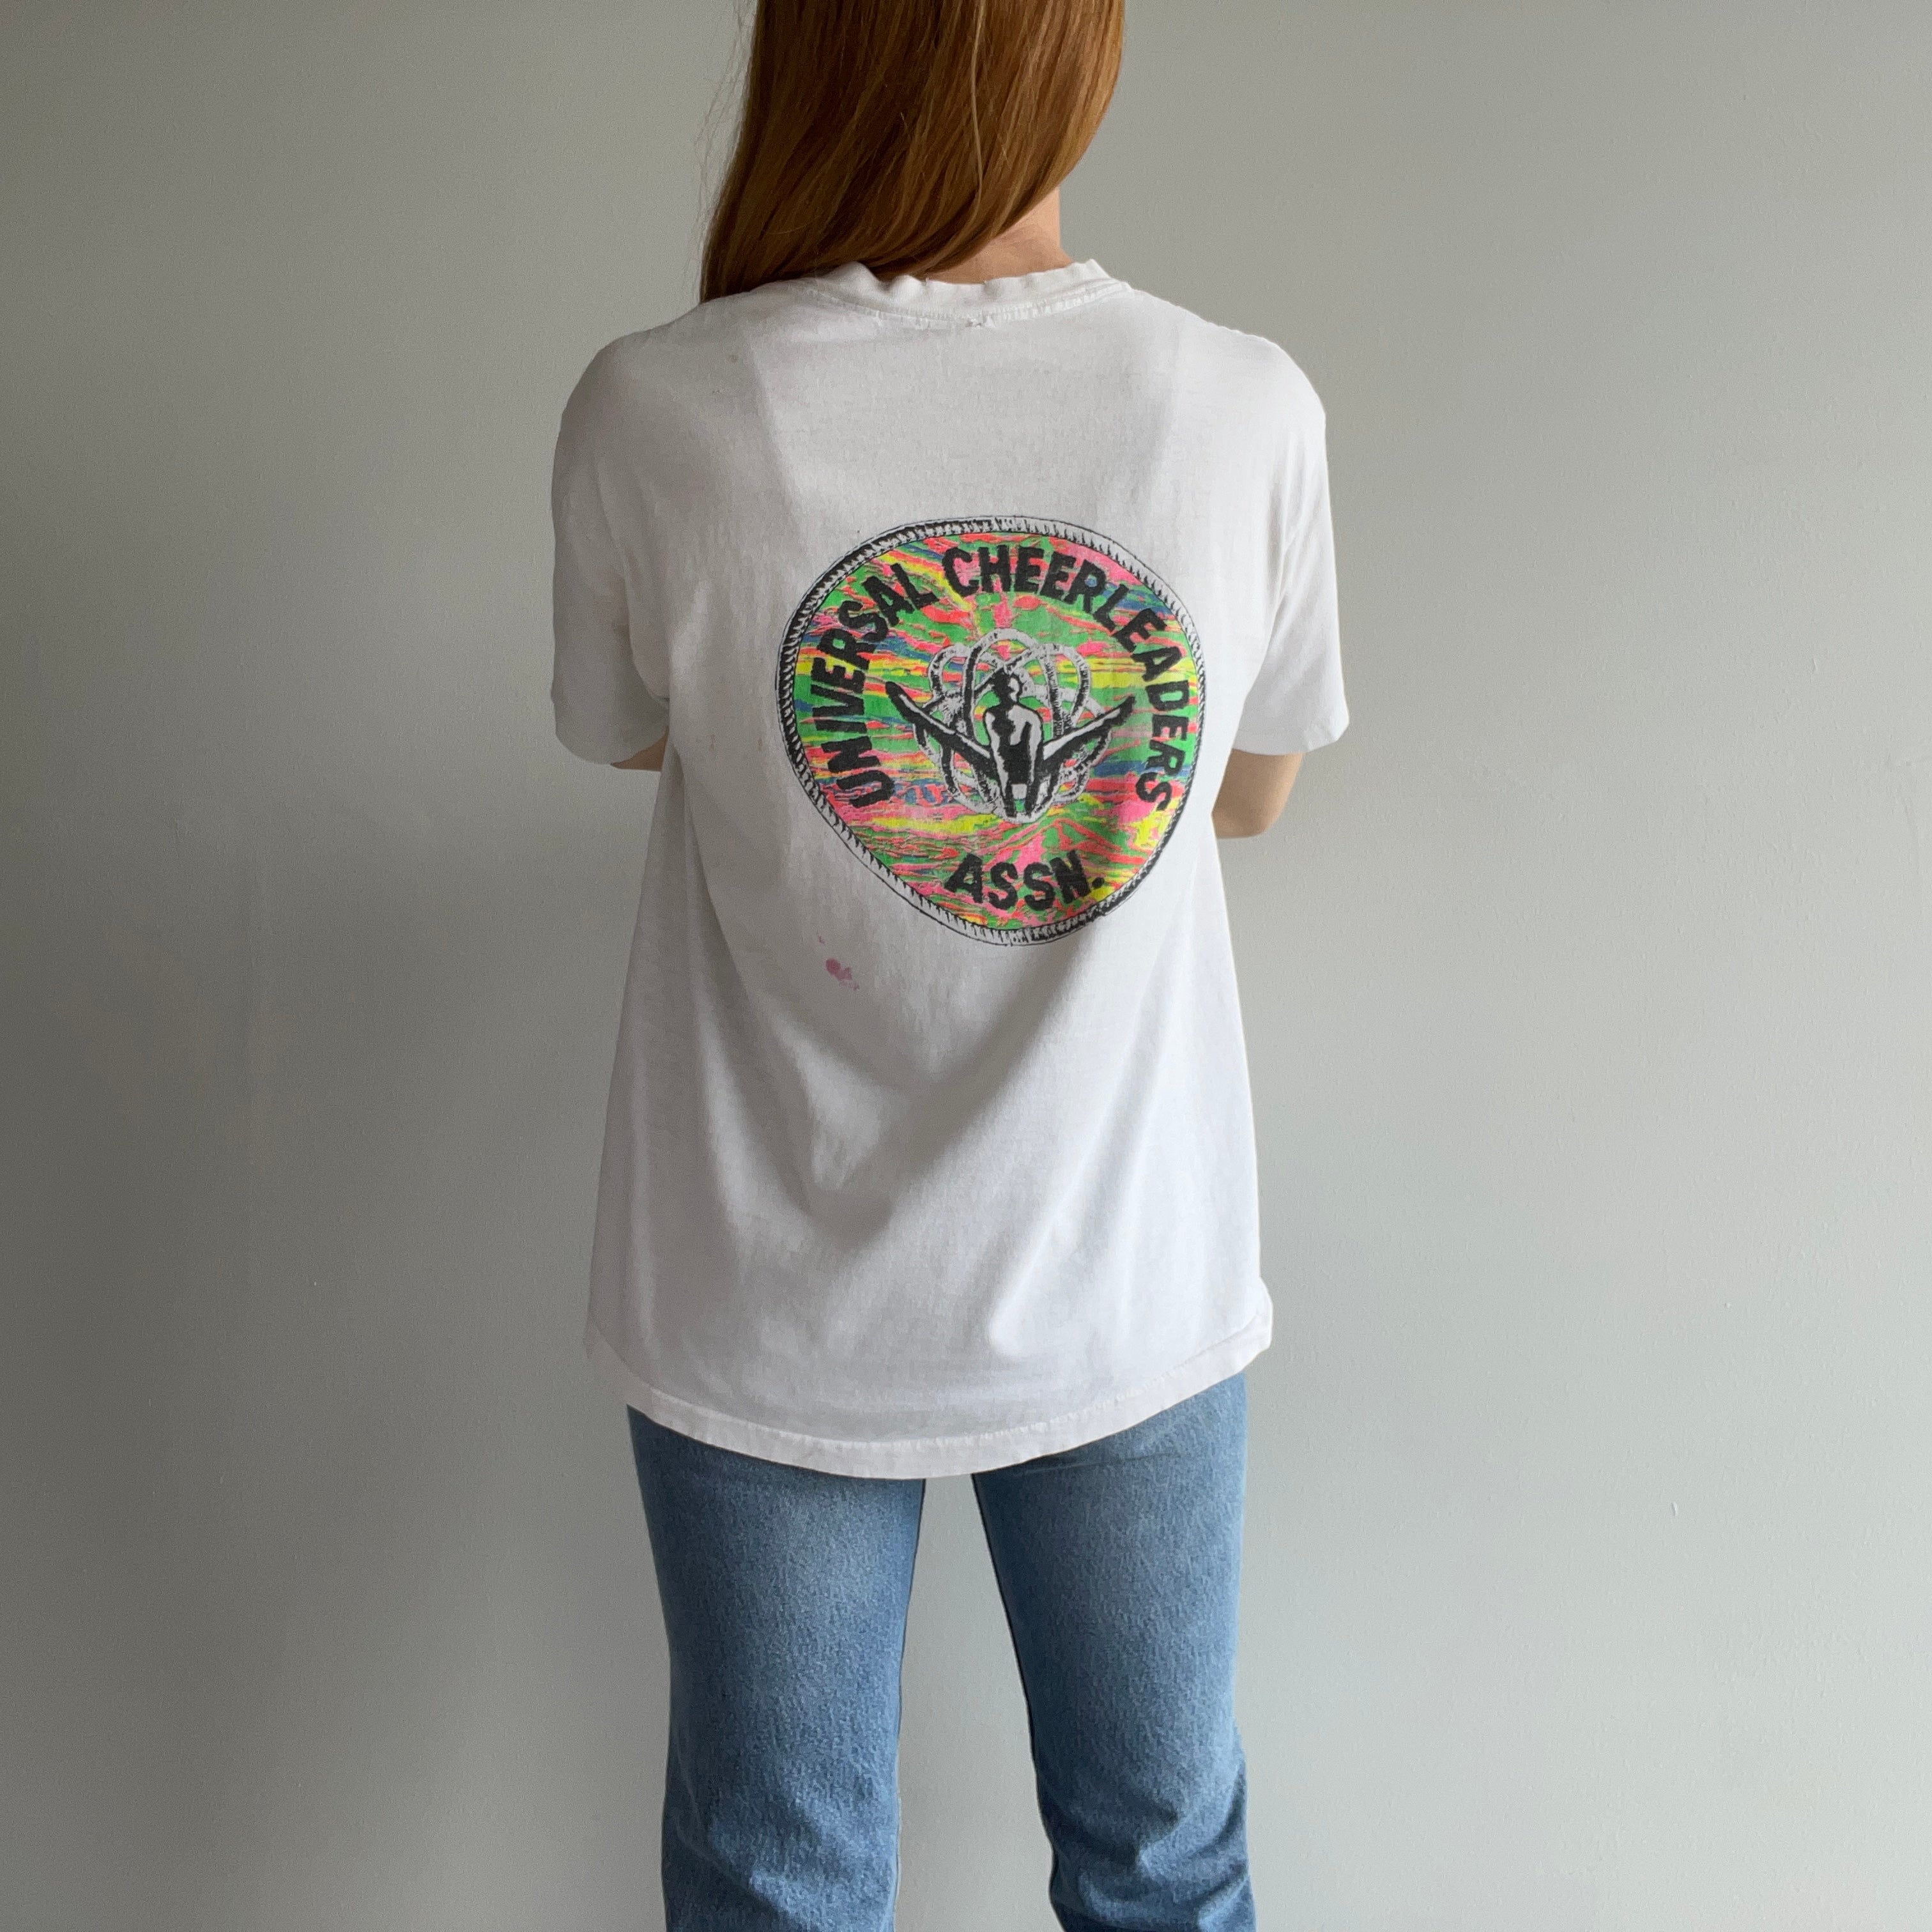 1990s Universal Cheerleader Assn. Super Stained (But in a Great Way) T-Shirt